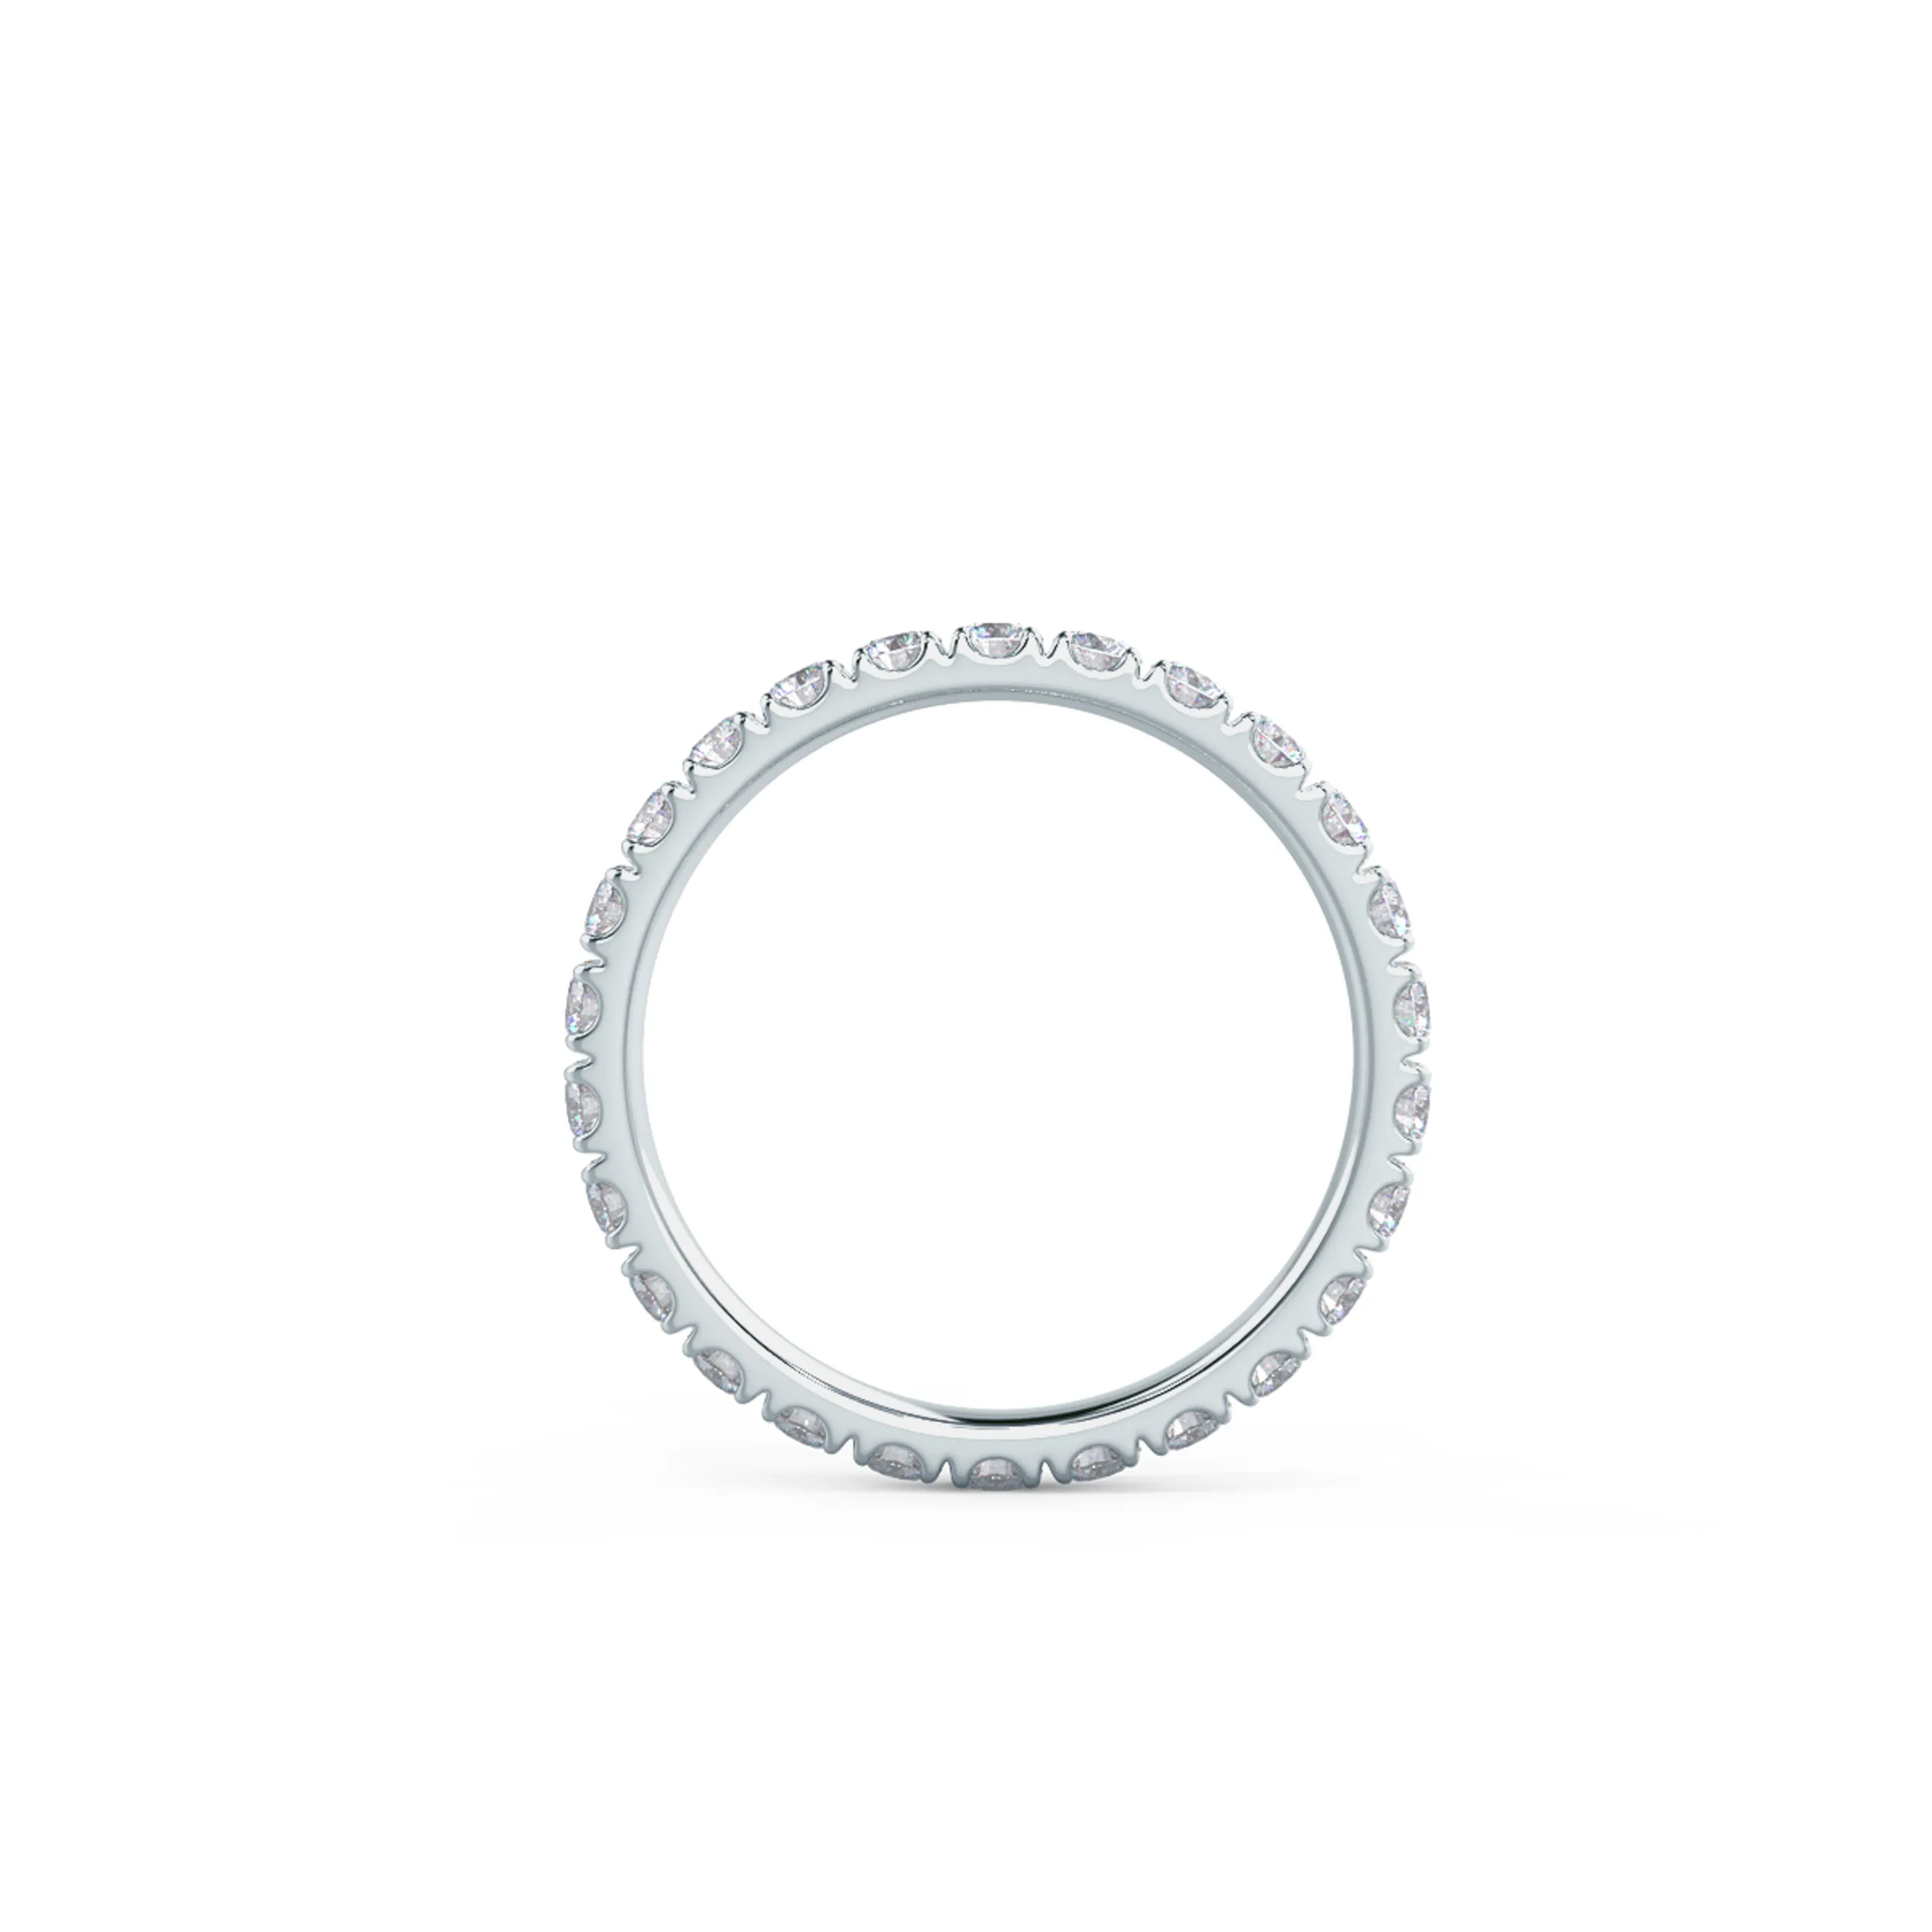 18k White Gold U Pavé Eternity Band featuring Hand Selected 1.0 Carat Round Diamonds (Profile View)